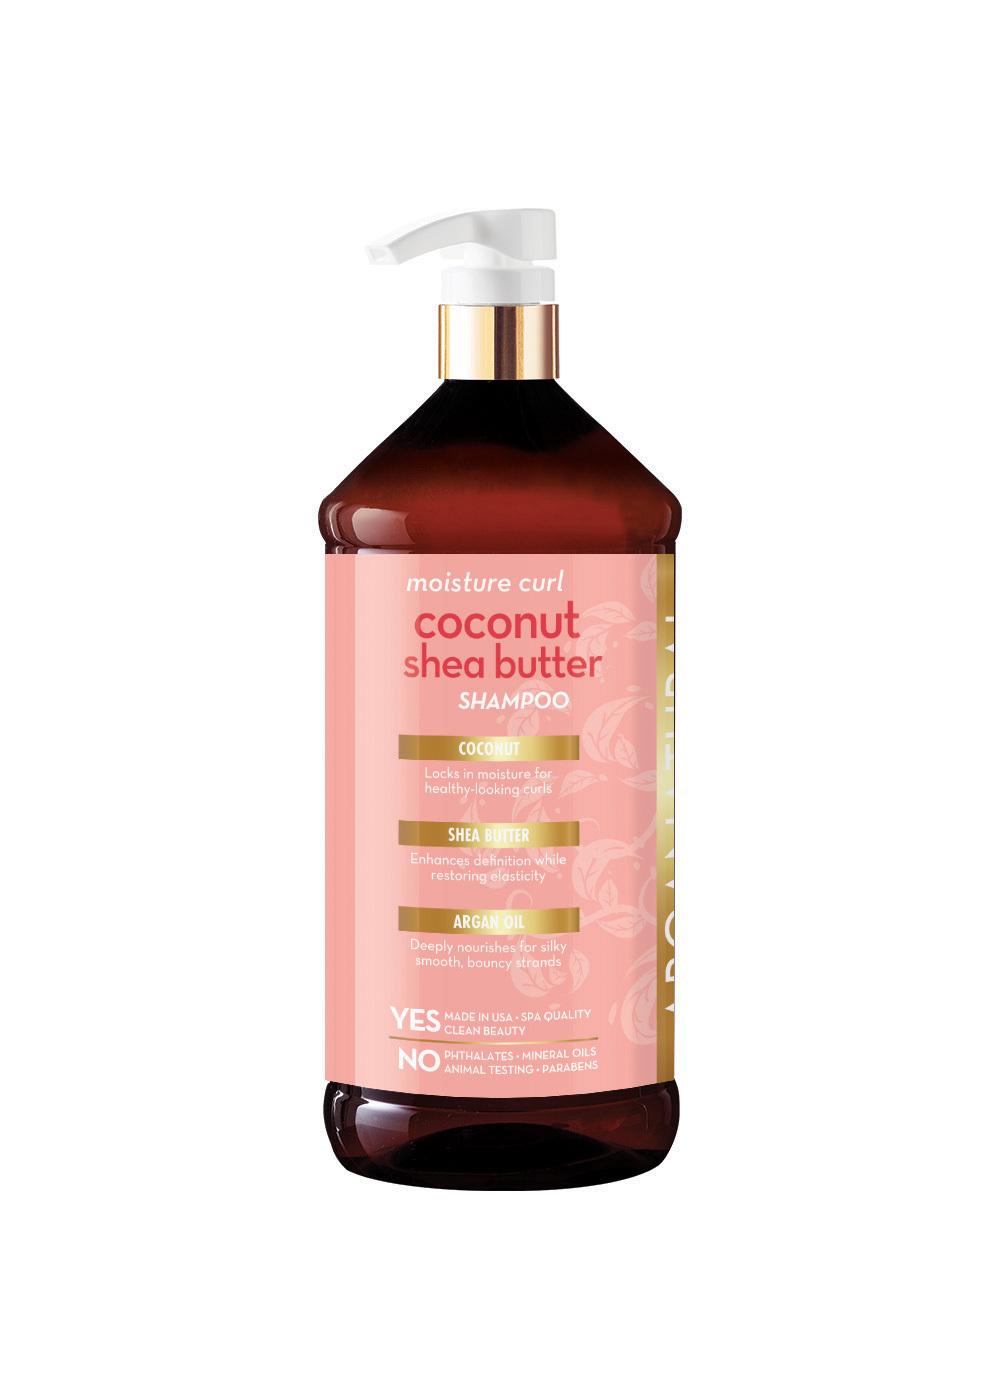 Arganatural 3 in 1 Curl Shampoo - Coconut Shea Butter; image 2 of 3